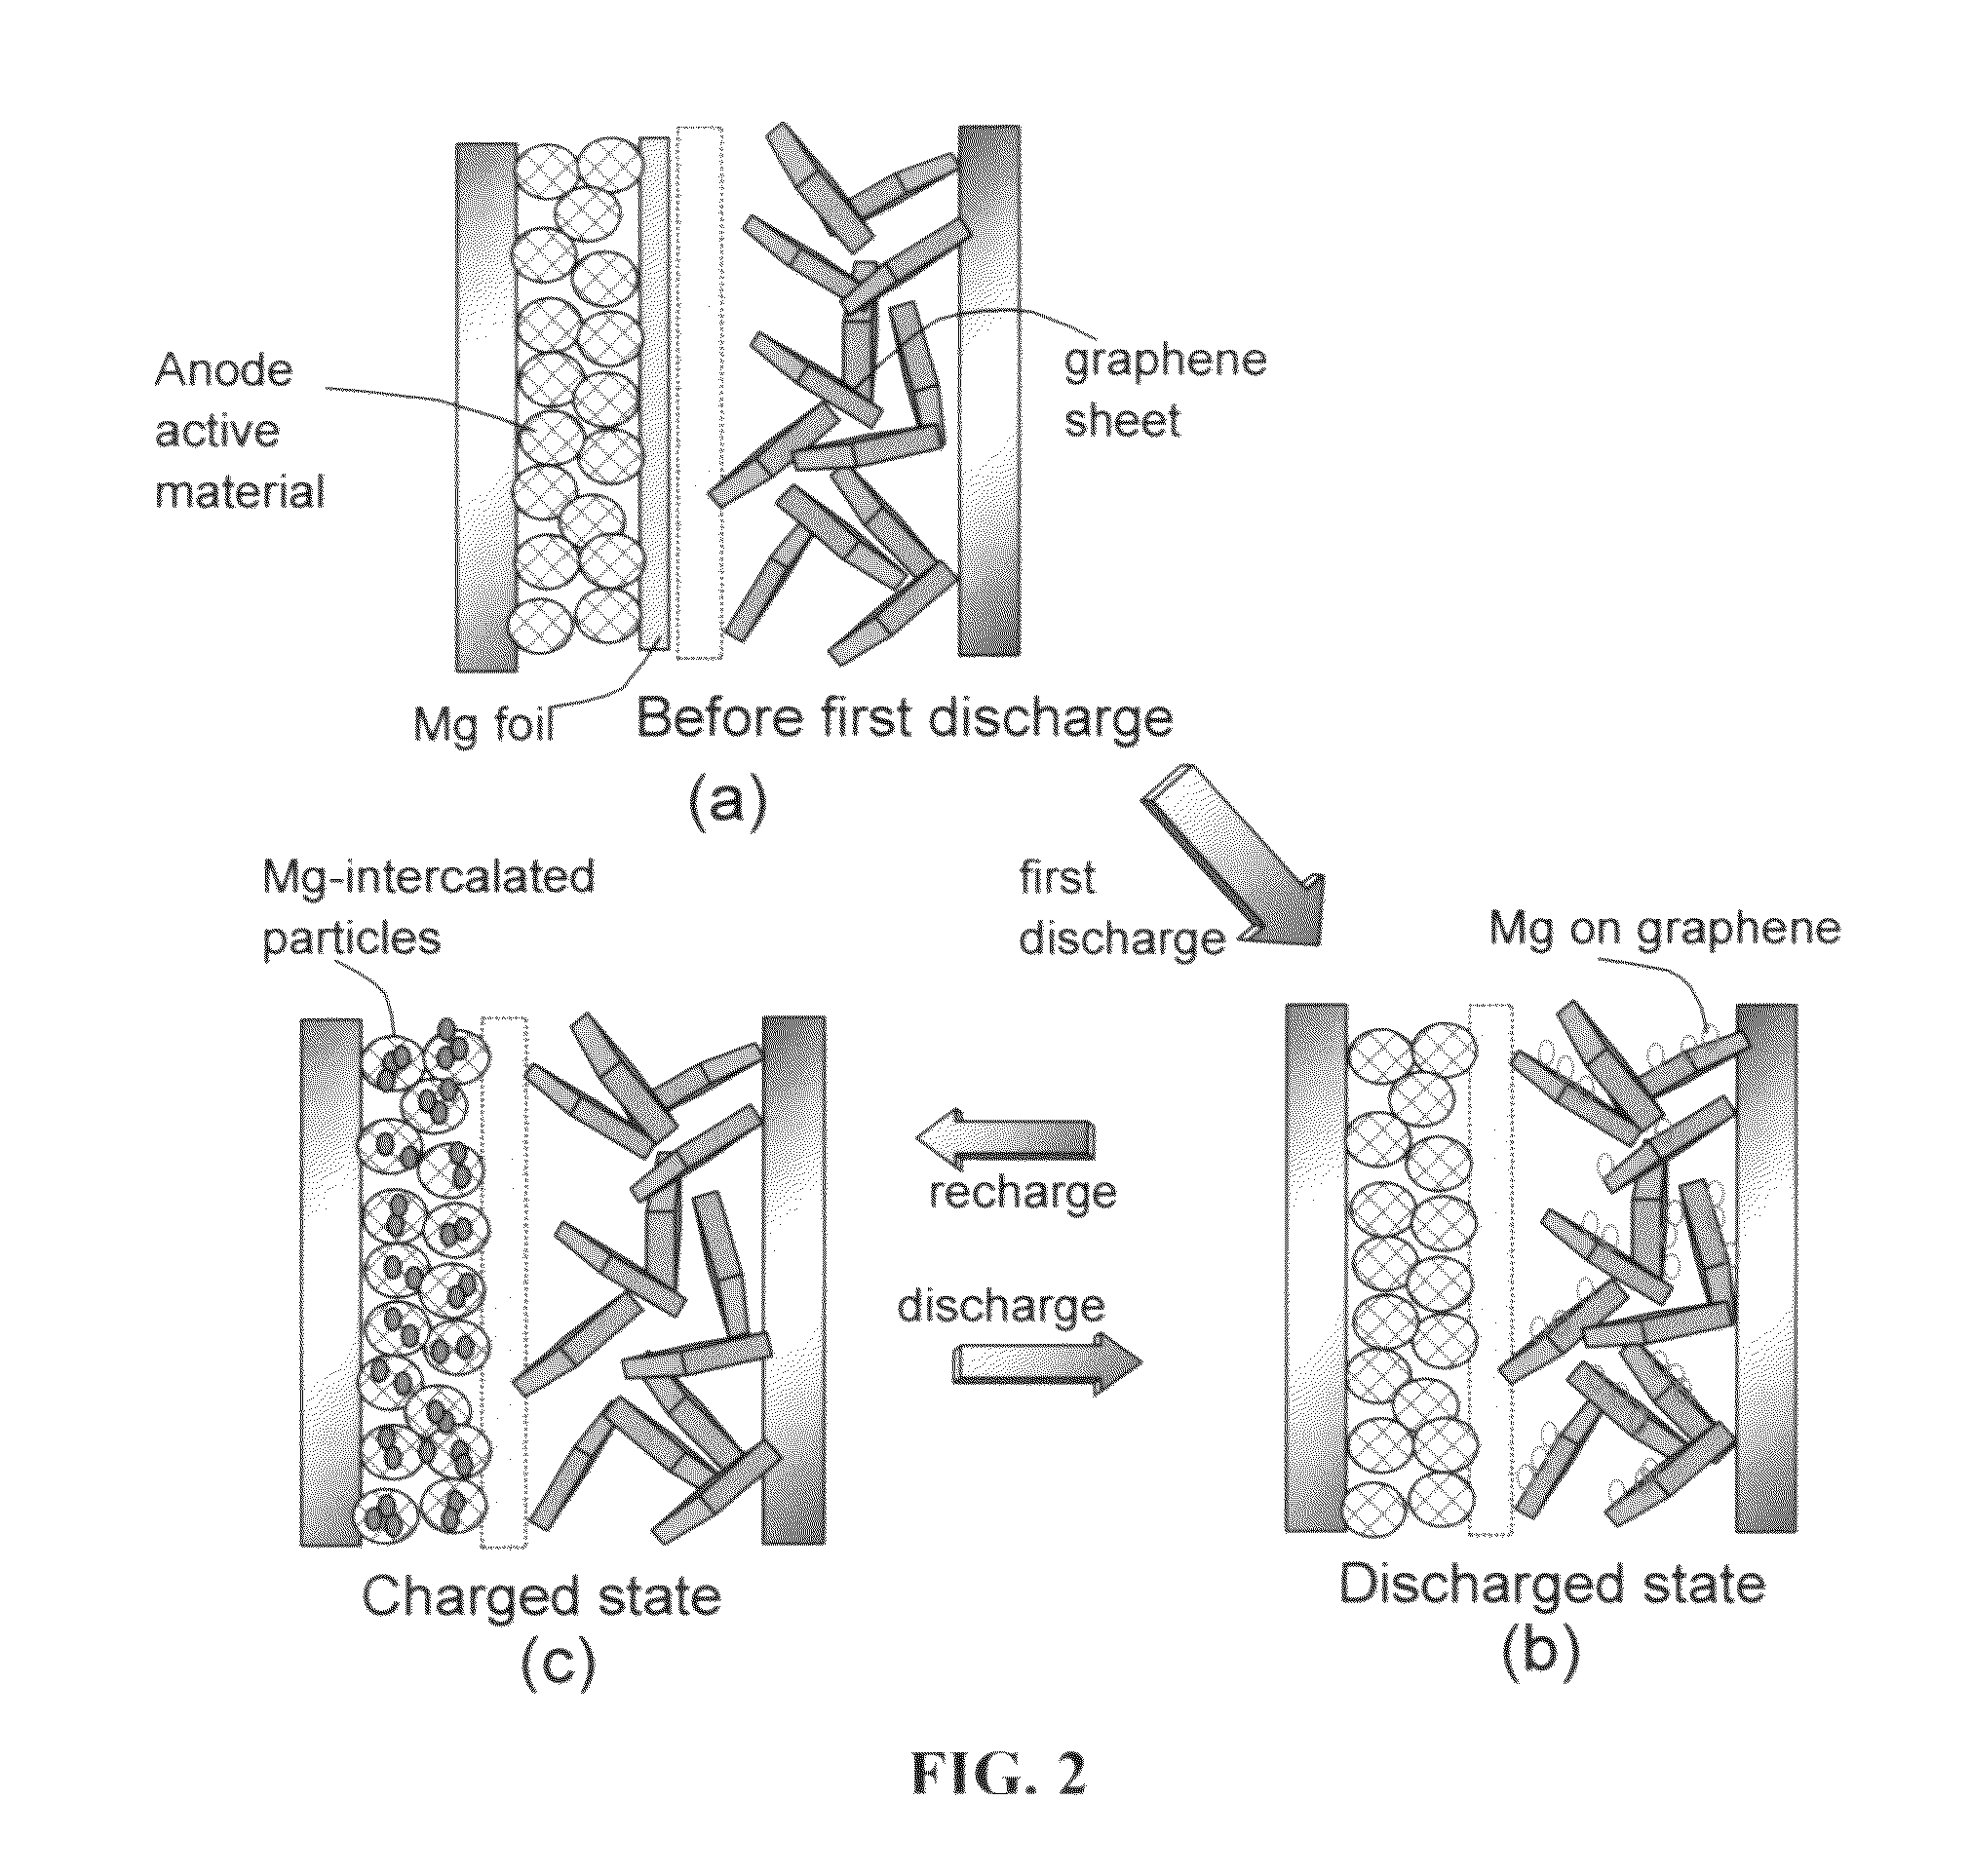 Rechargeable magnesium-ion cell having a high-capacity cathode